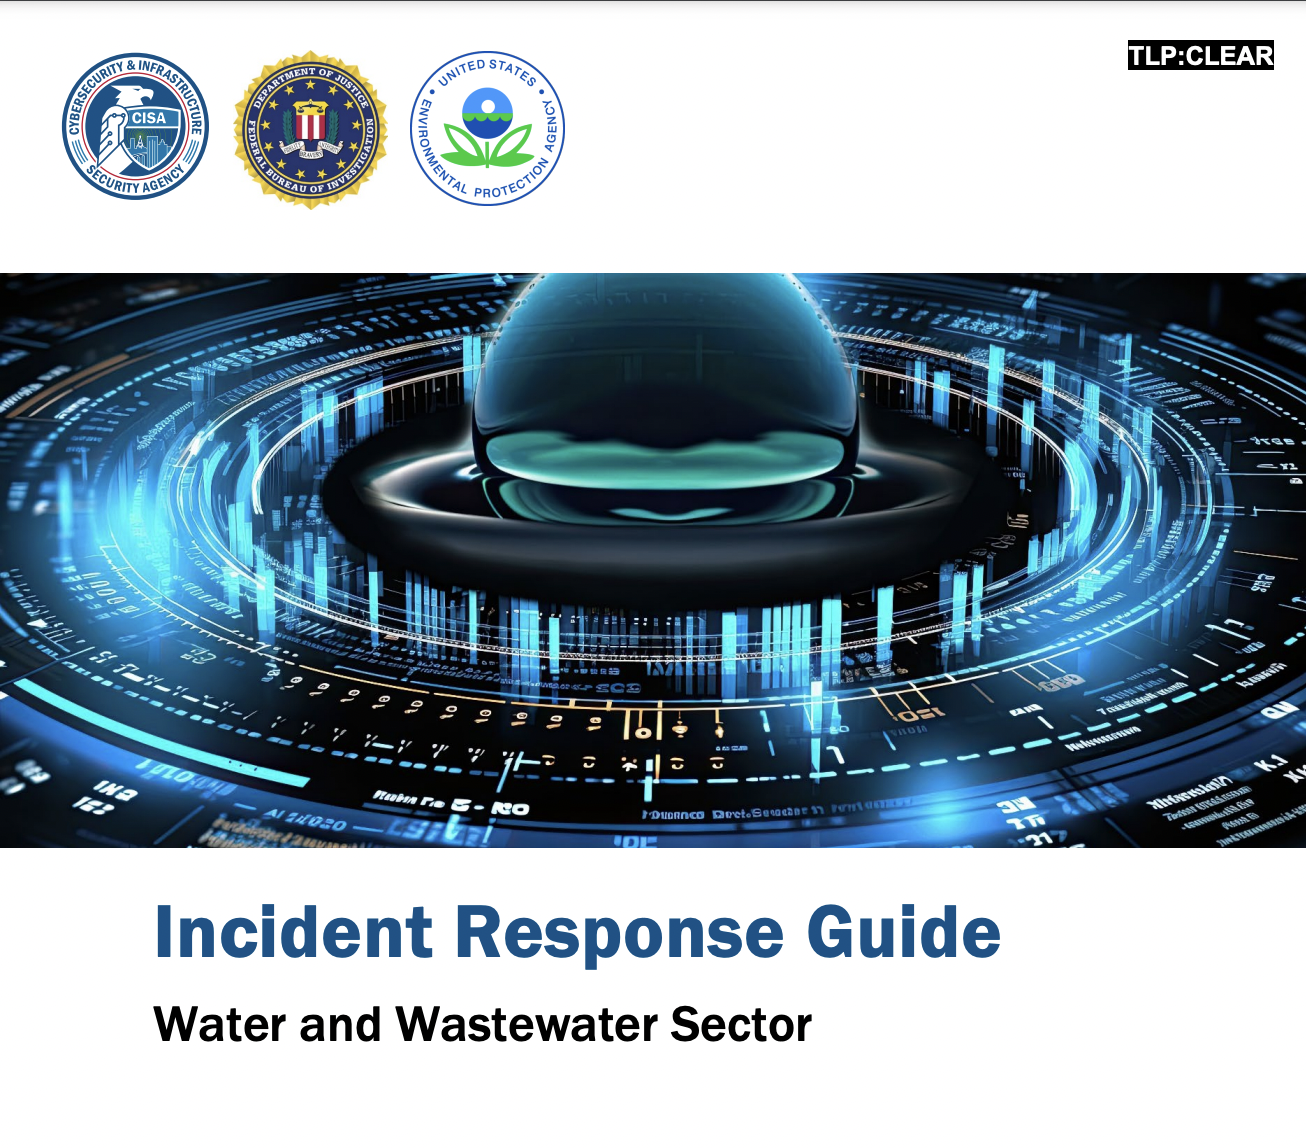 Guide for Water and Wastewater Systems Sector